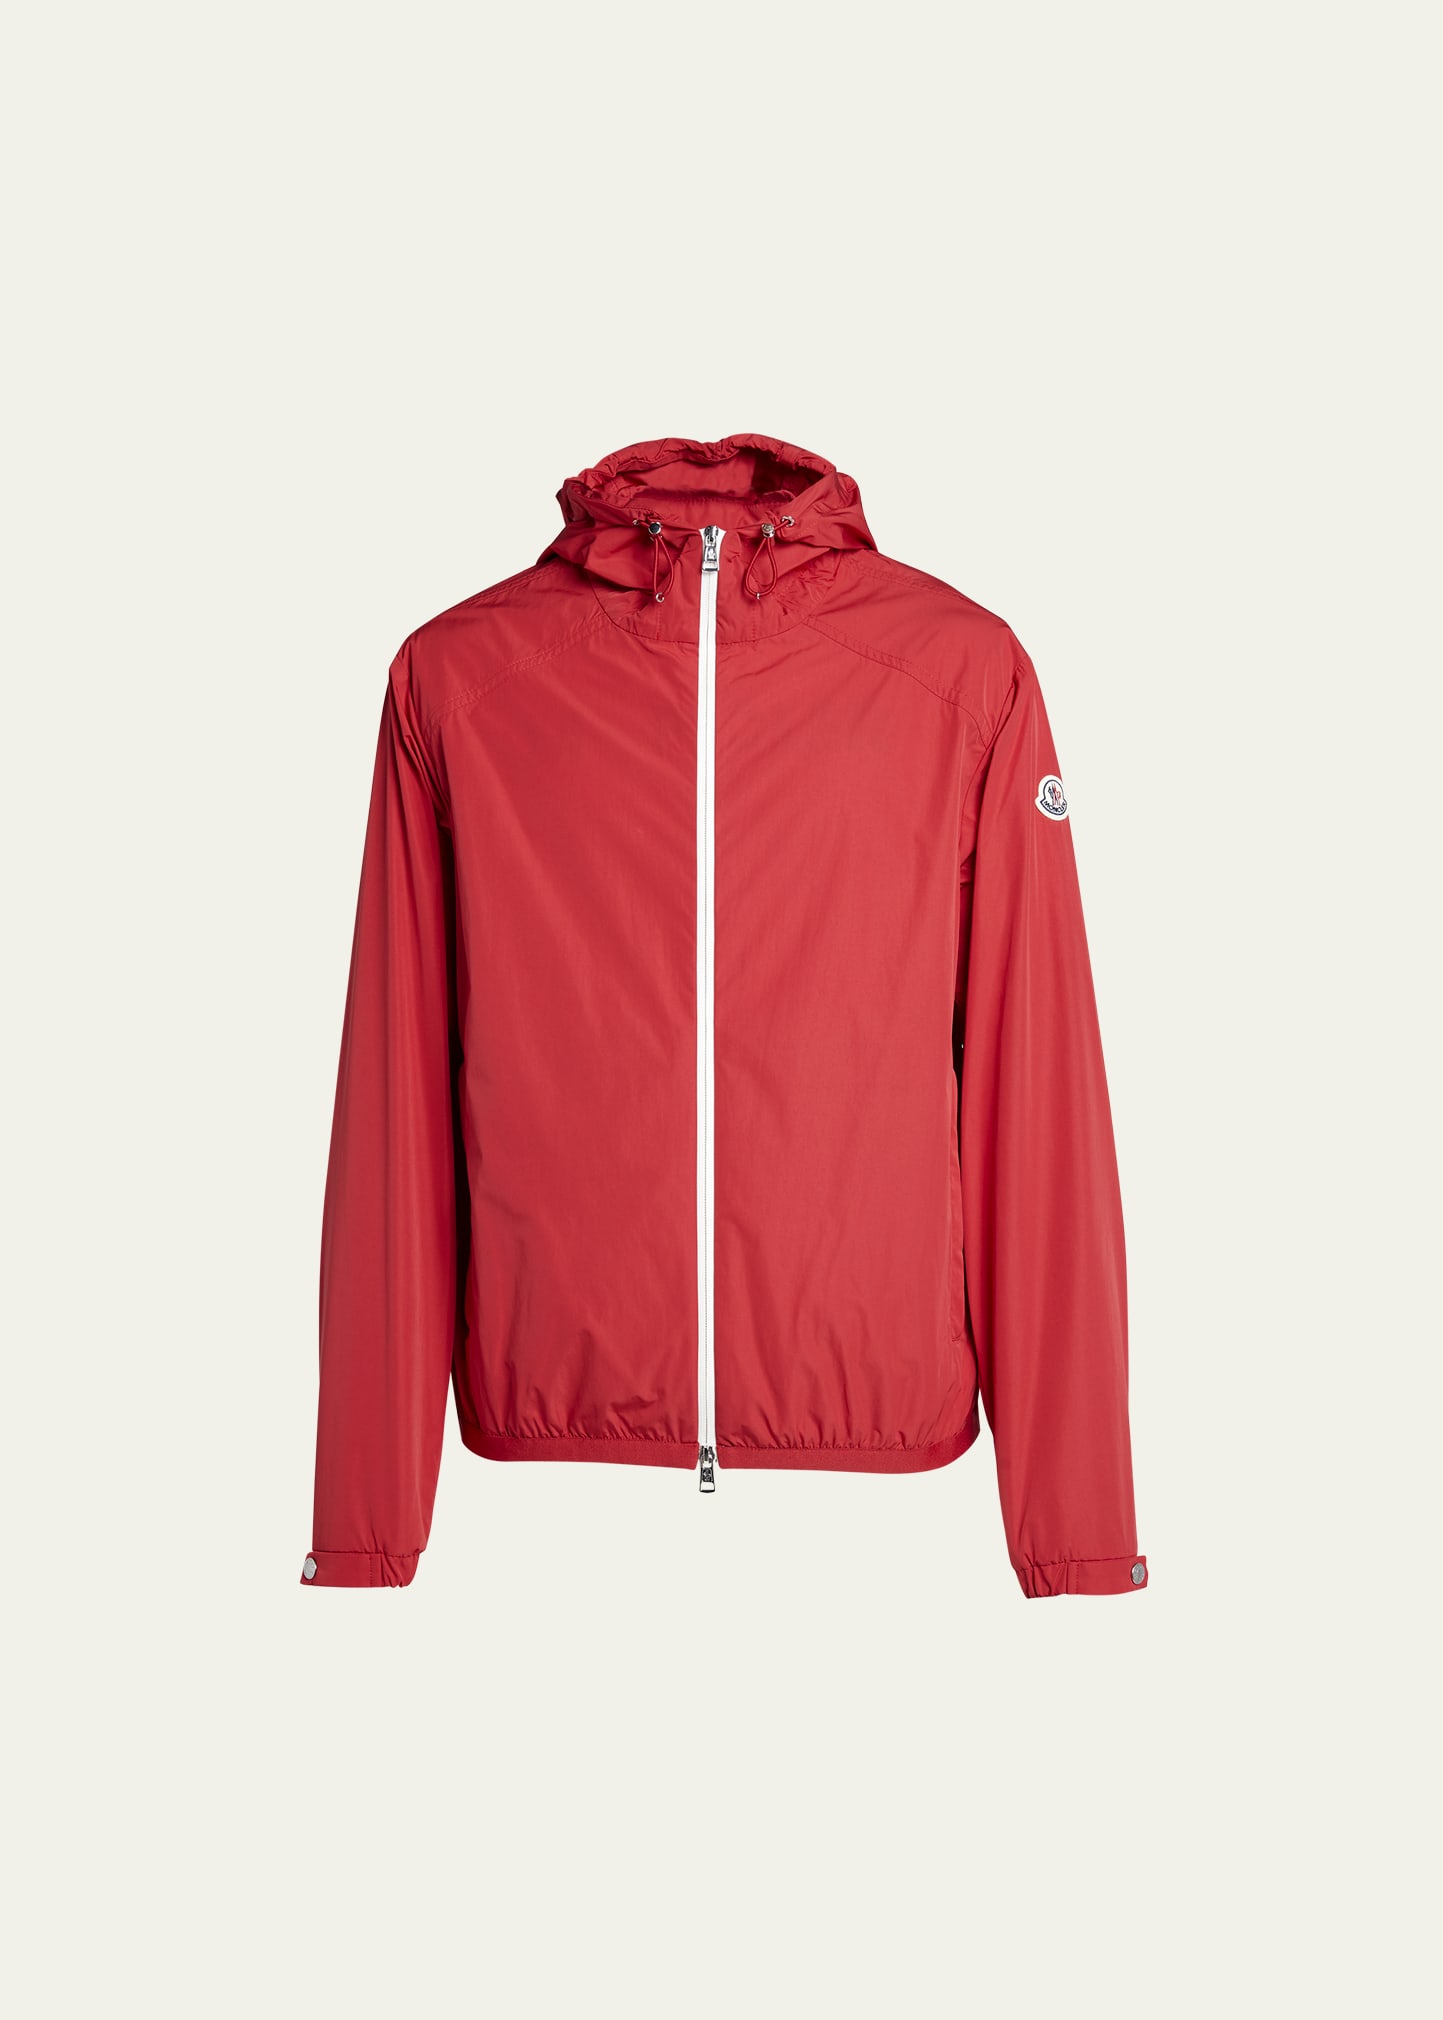 Moncler Men's Archivio Hooded Clapier Jacket In Red